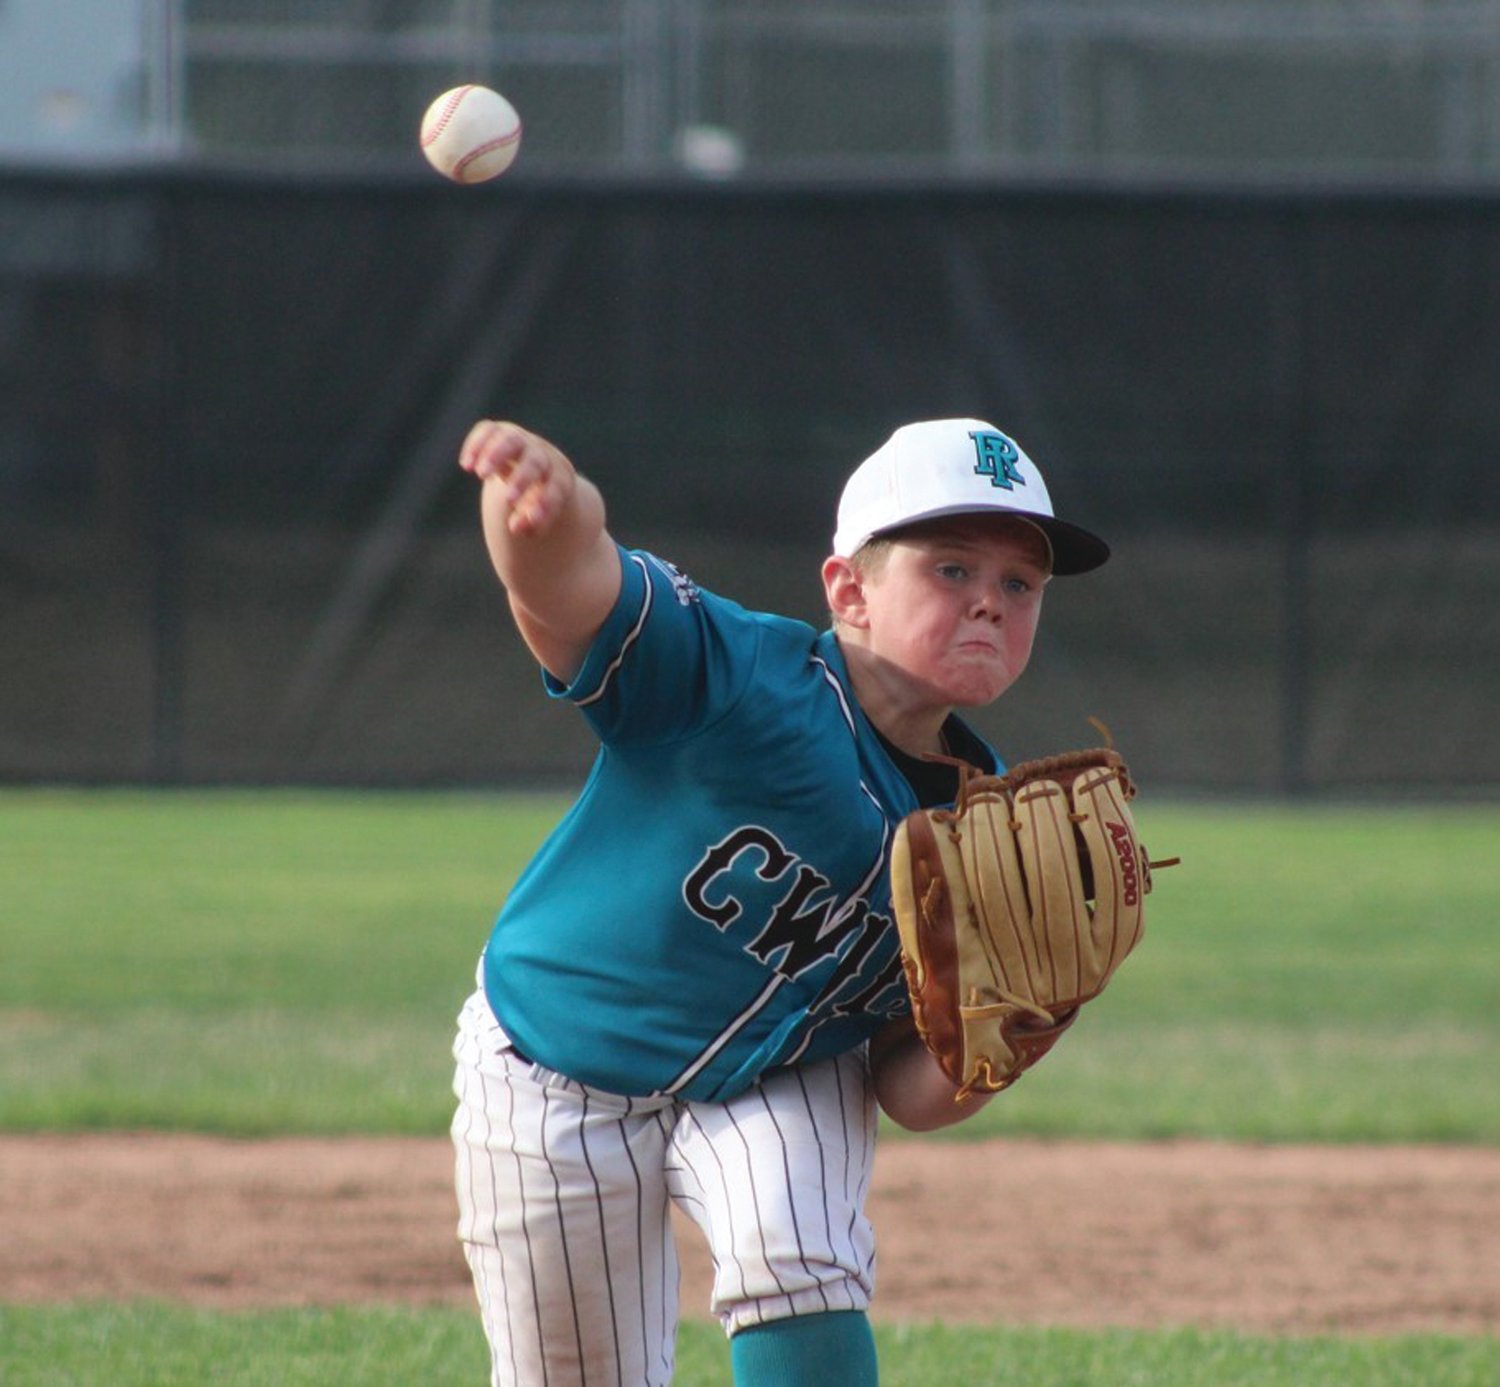 TOE THE RUBBER: CWLL’s Nolan Winters delivers a pitch. (Photo by Alex Sponseller)